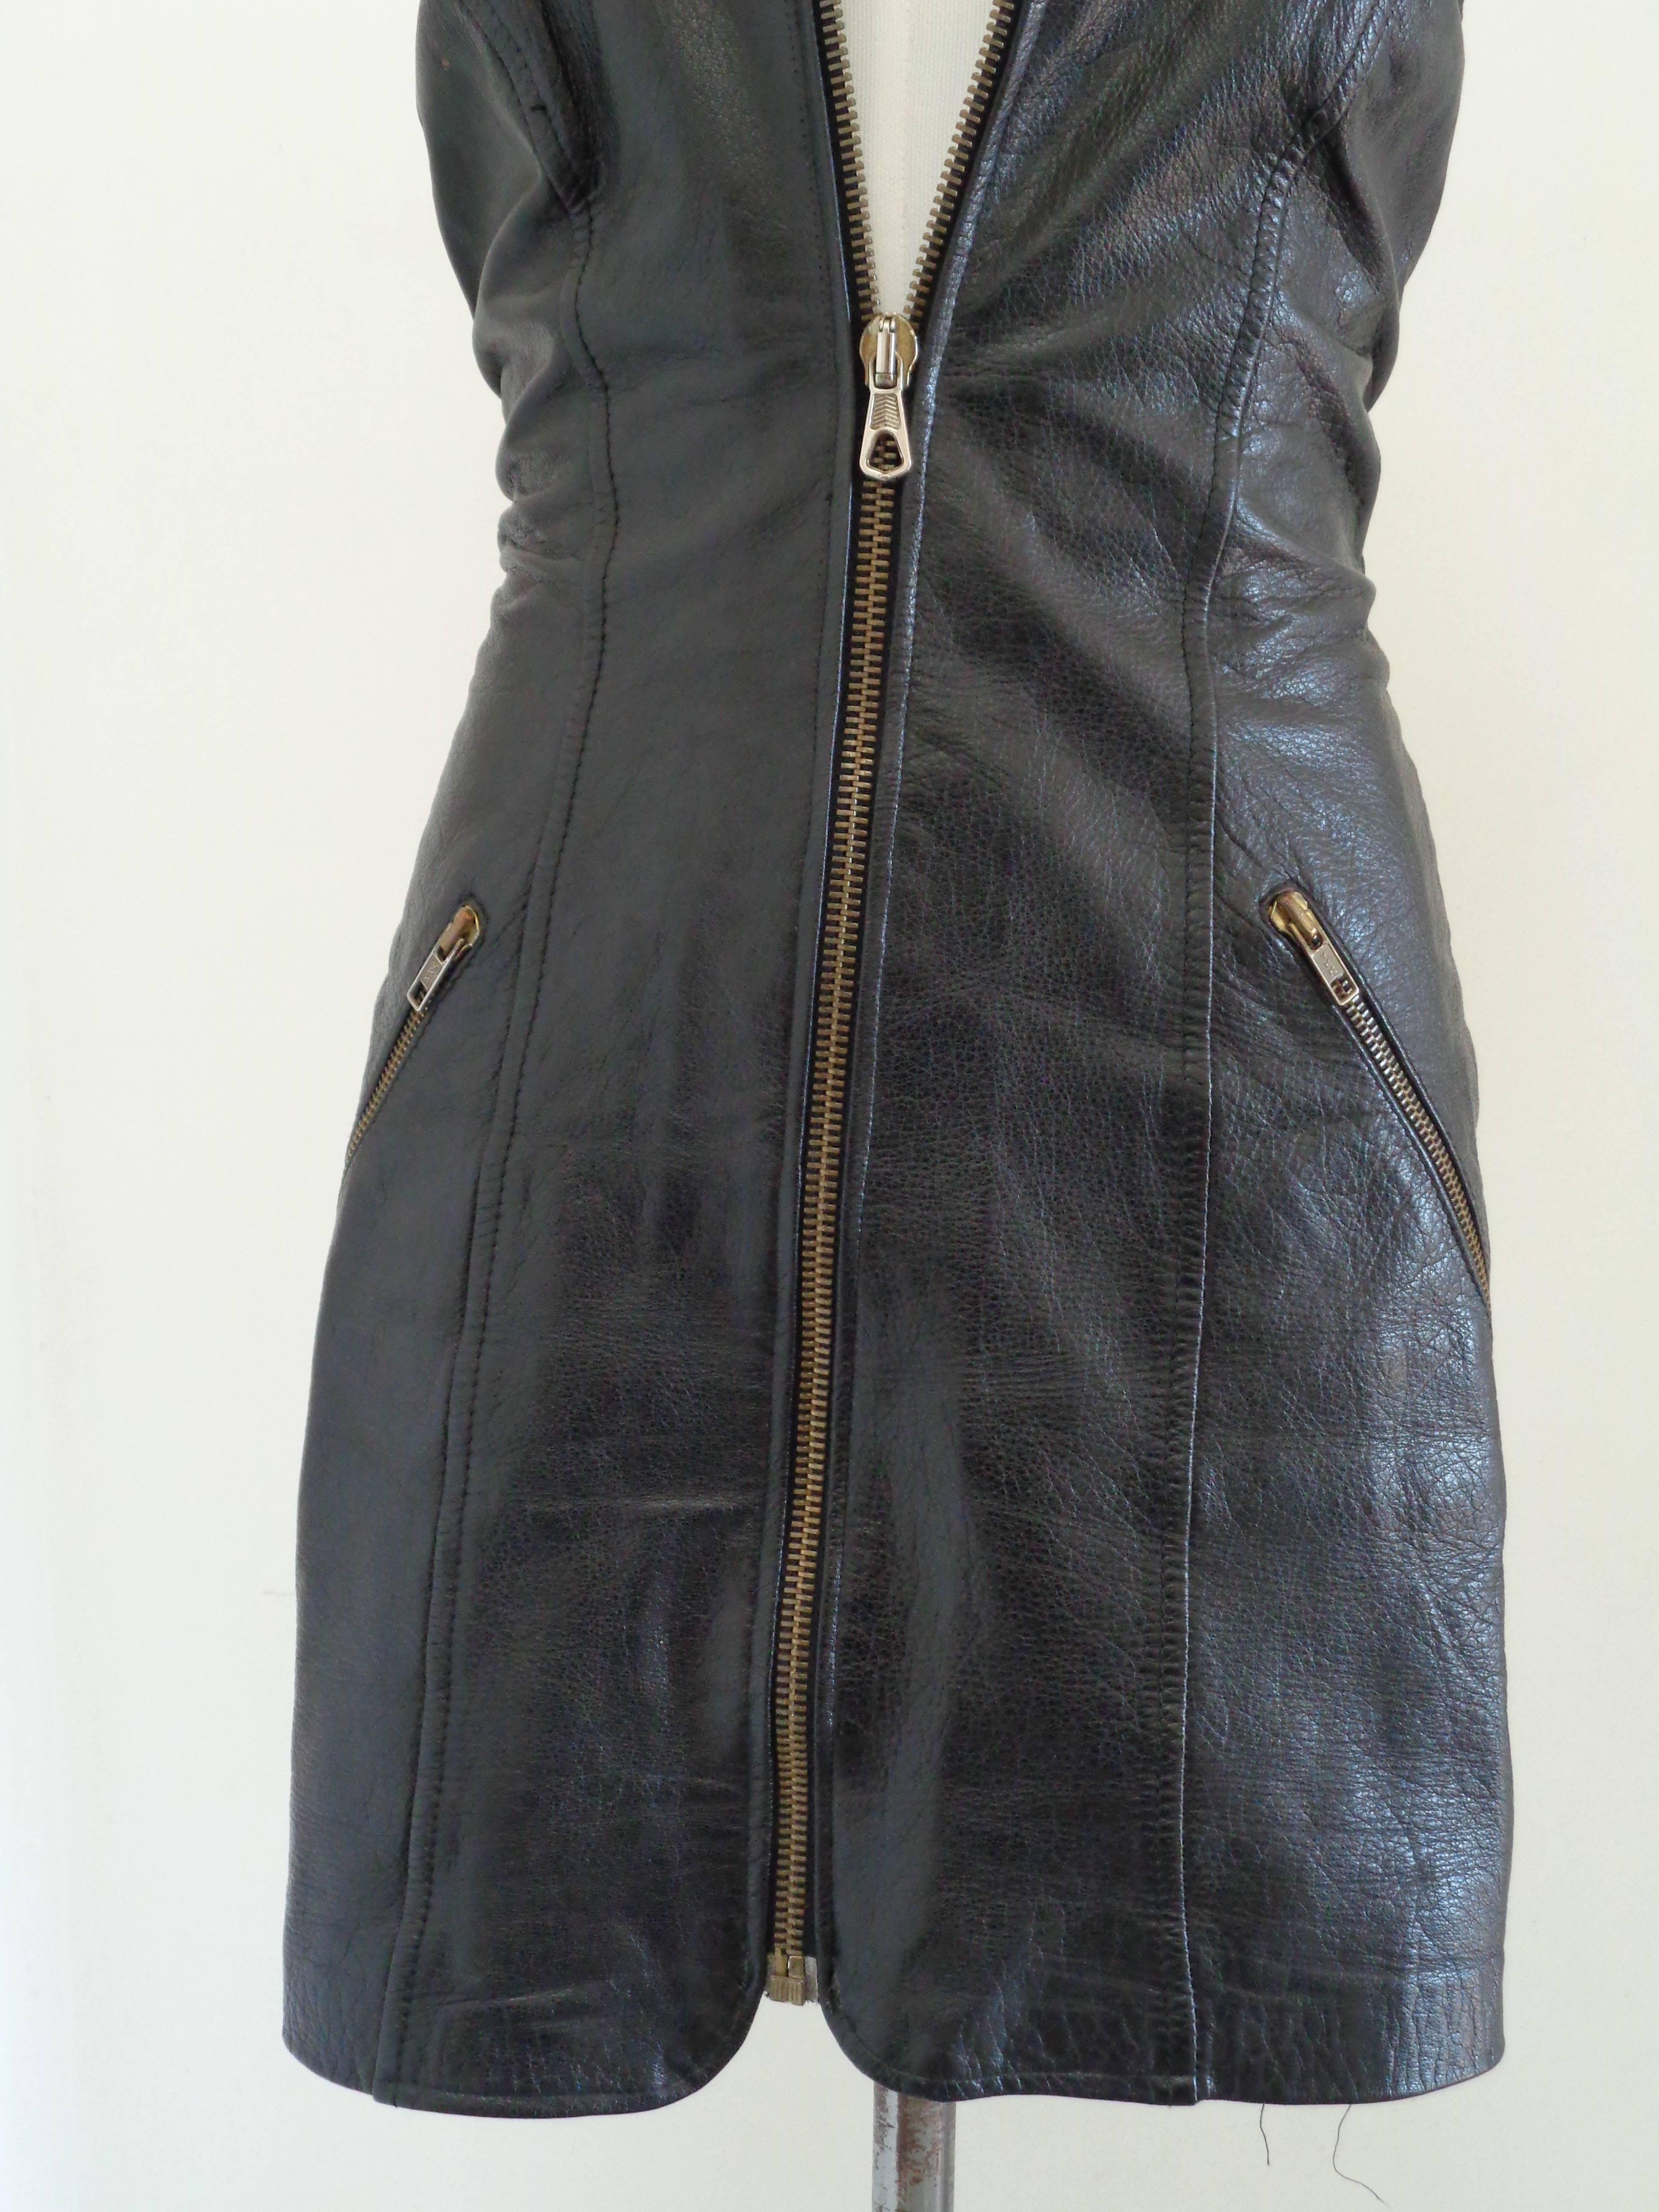 Moschino Cheap & Chic Black Leather Dress

Totally made in italy in size M 